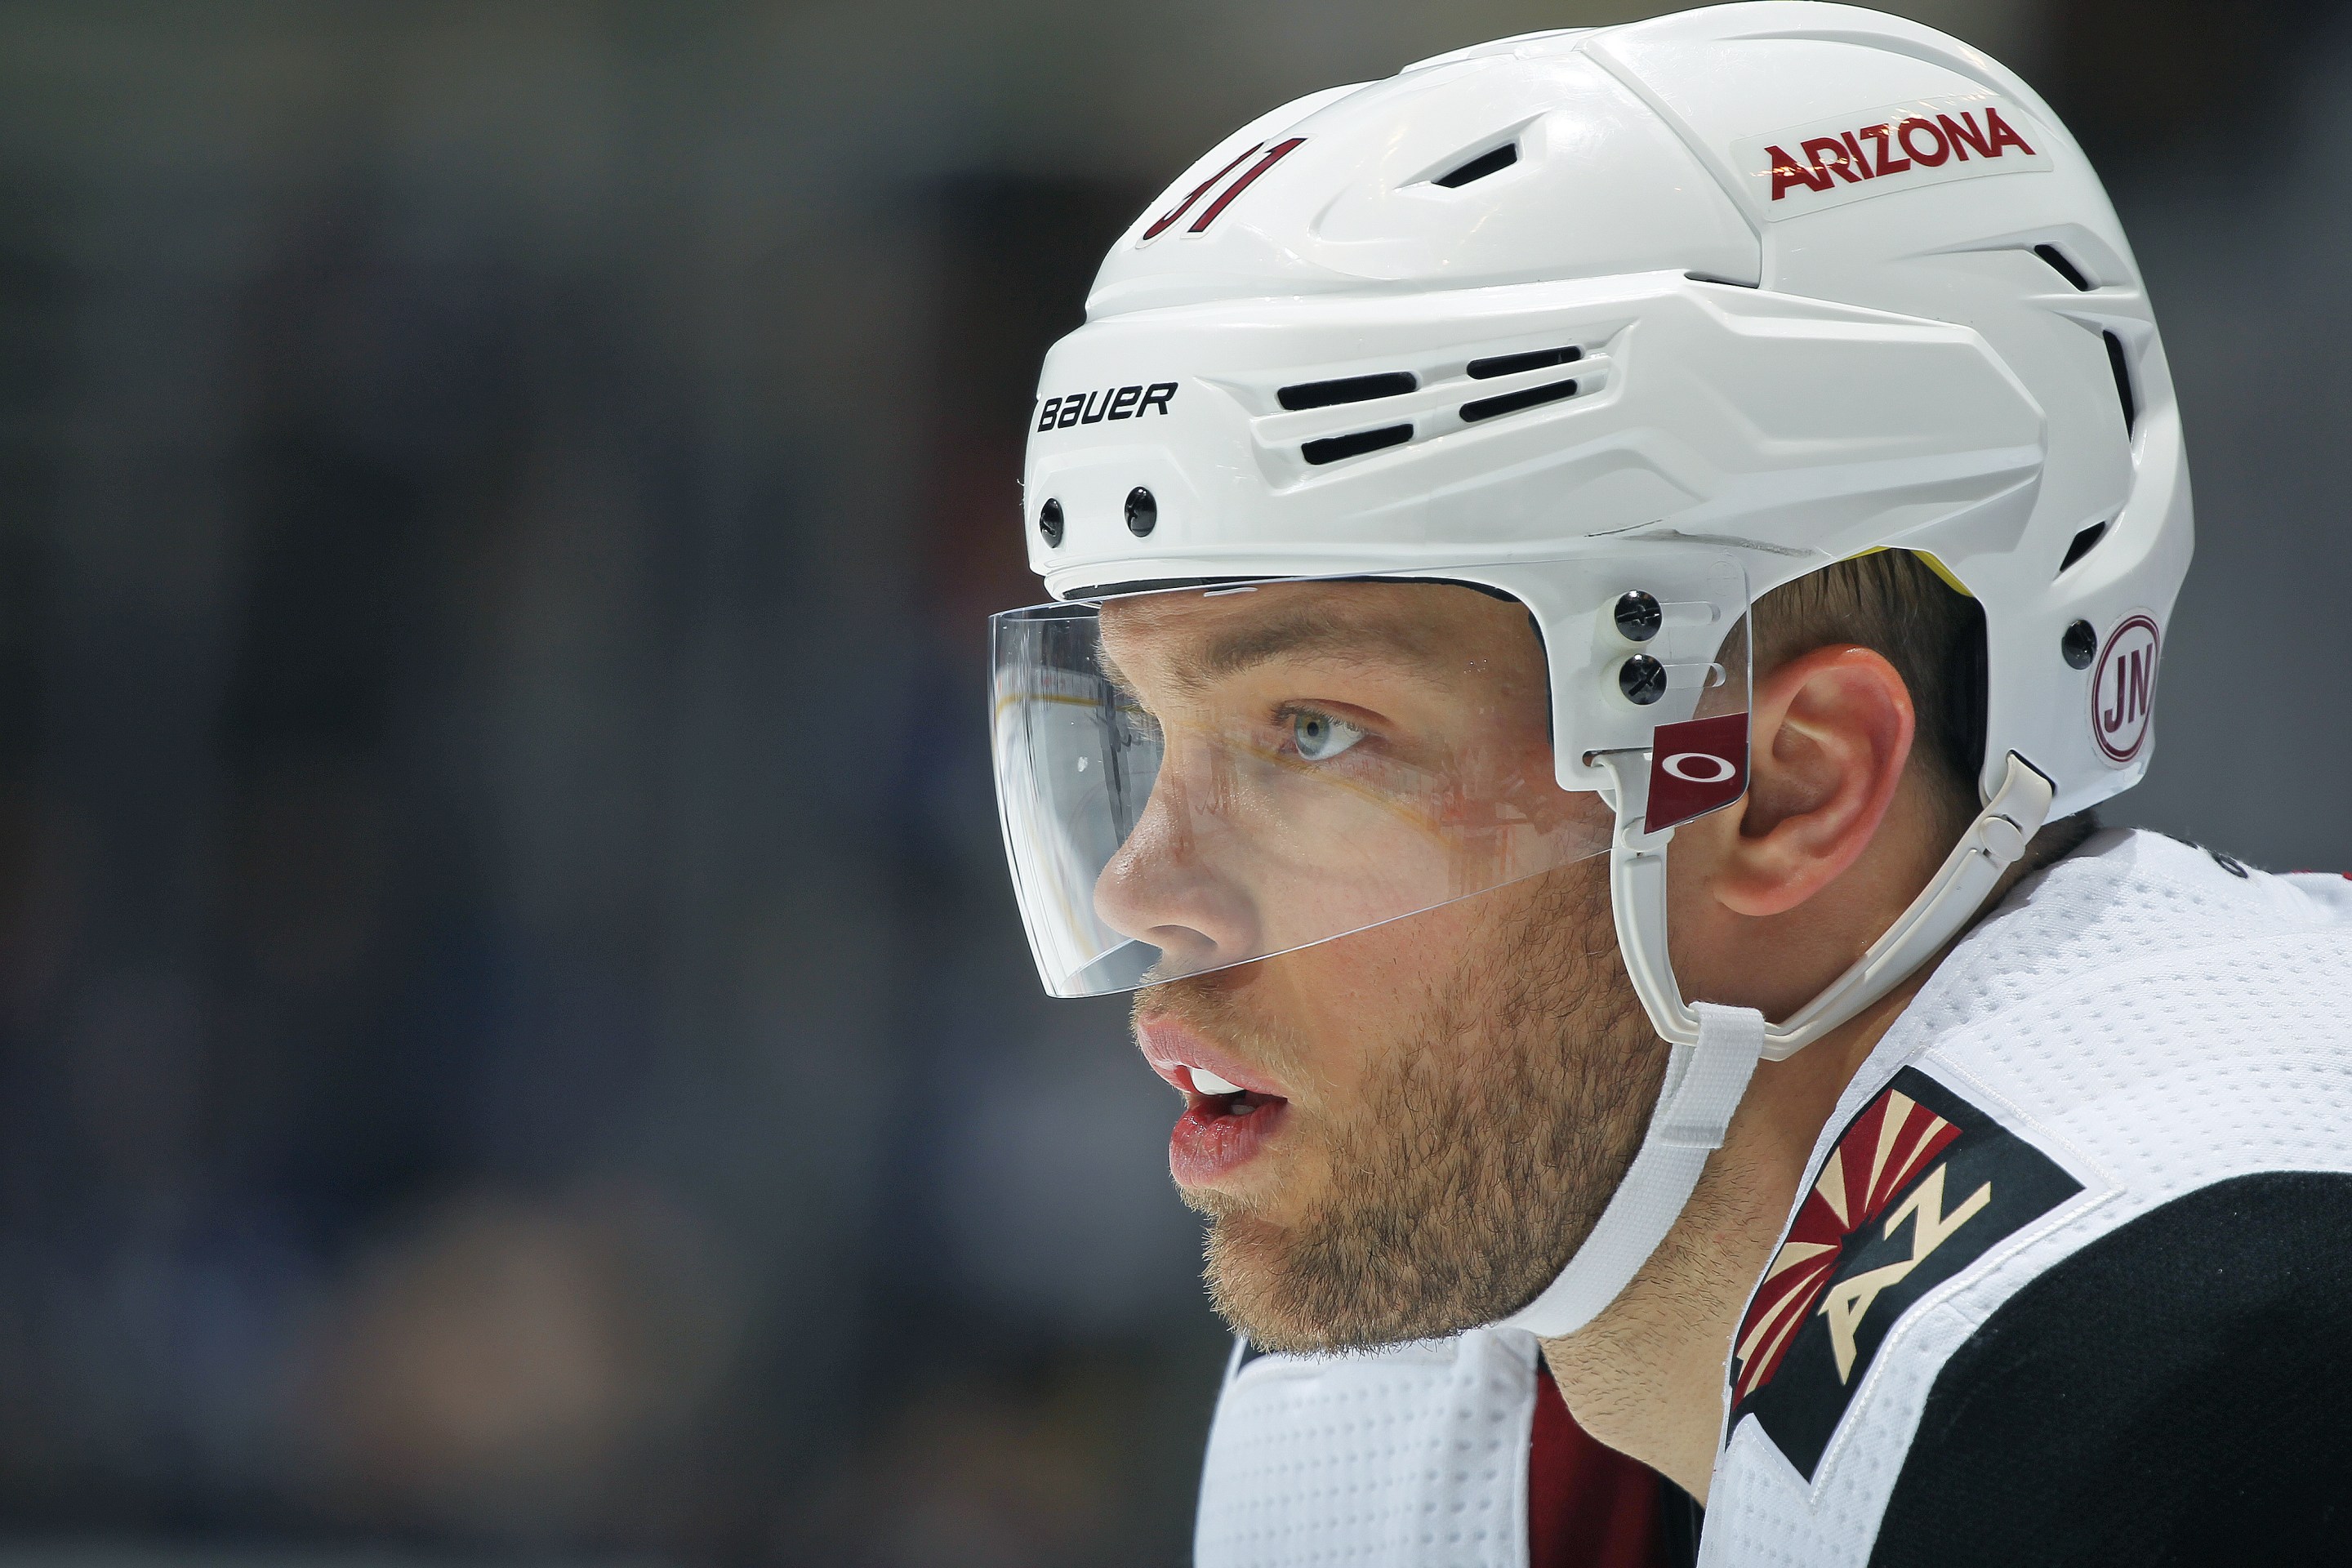 Taylor Hall #91 of the Arizona Coyotes waits for a puck drop